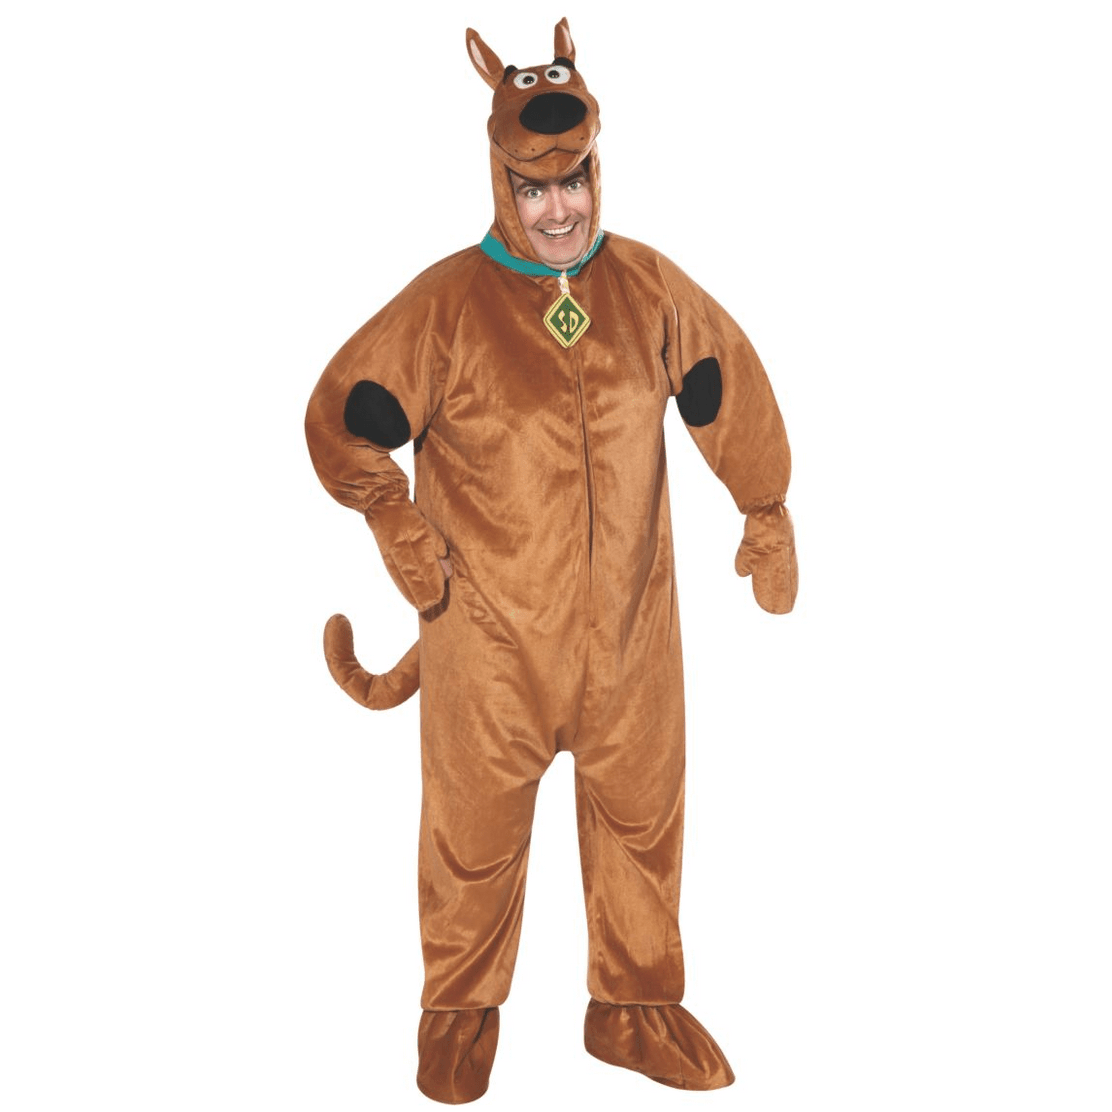 Scooby-Doo Plus Size Onepiece Adult Costume